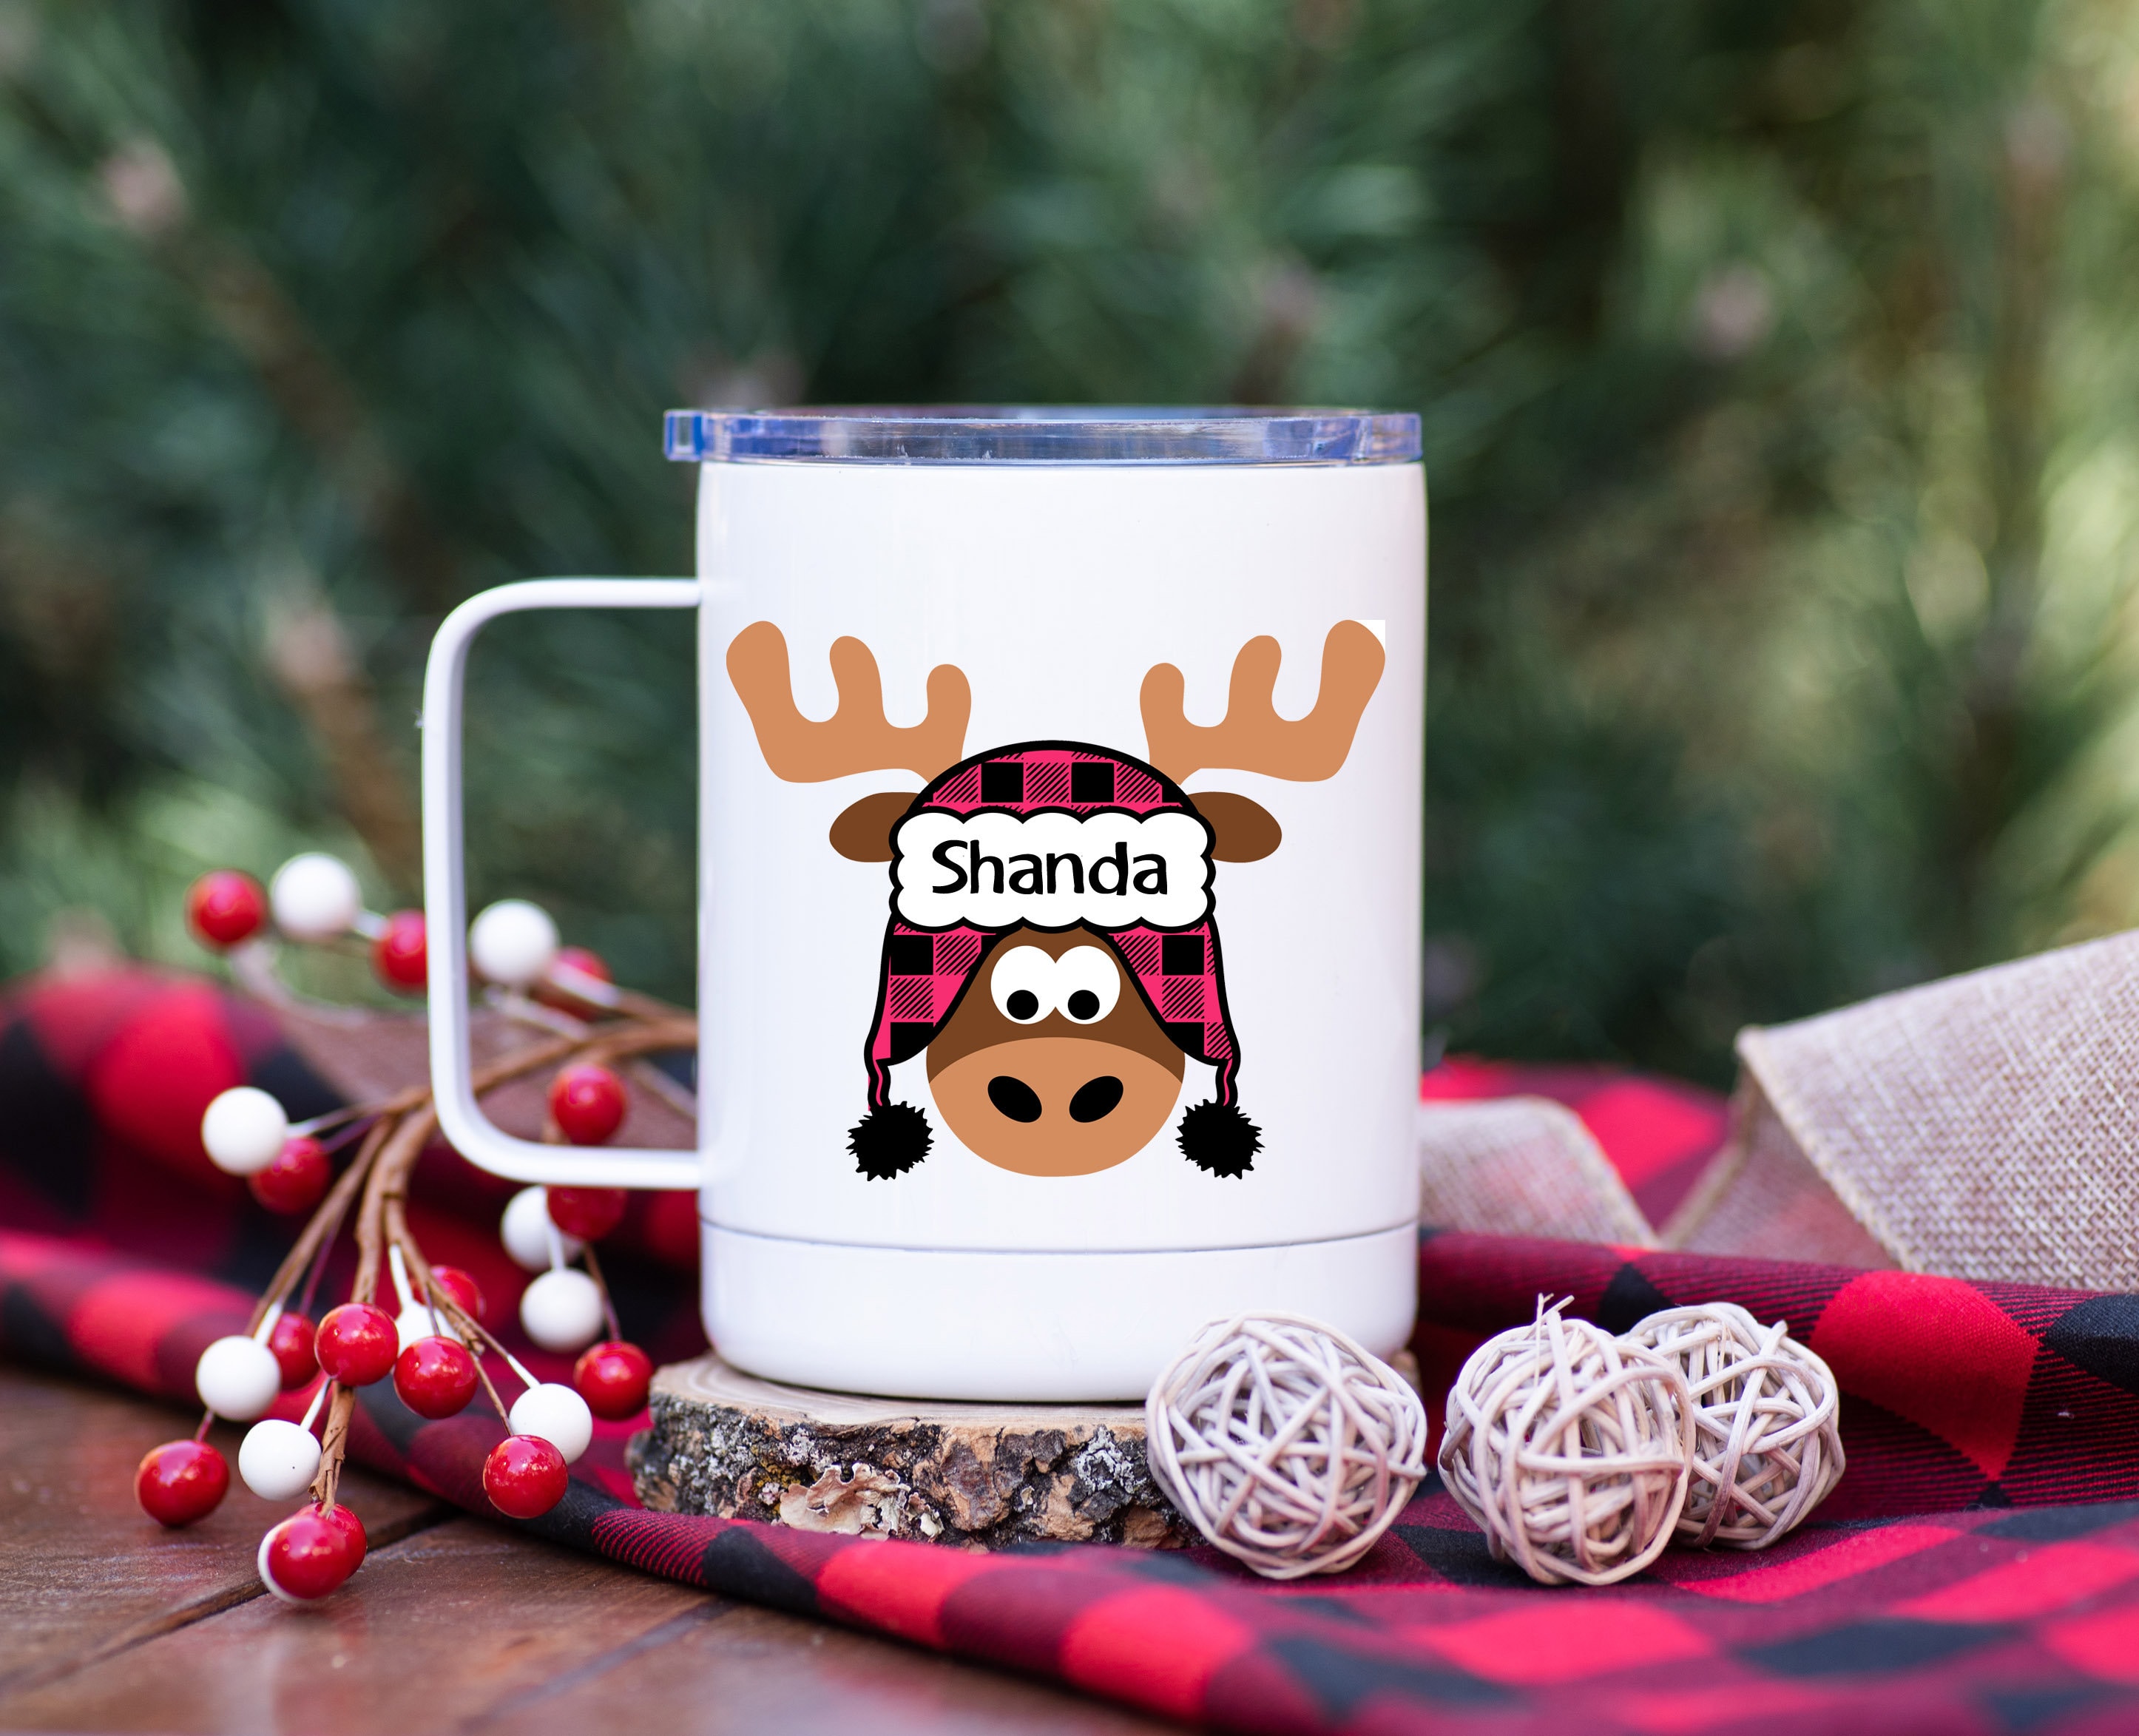 Christmas Moose Personalized Toddler 8oz. Straw Sippy Cup